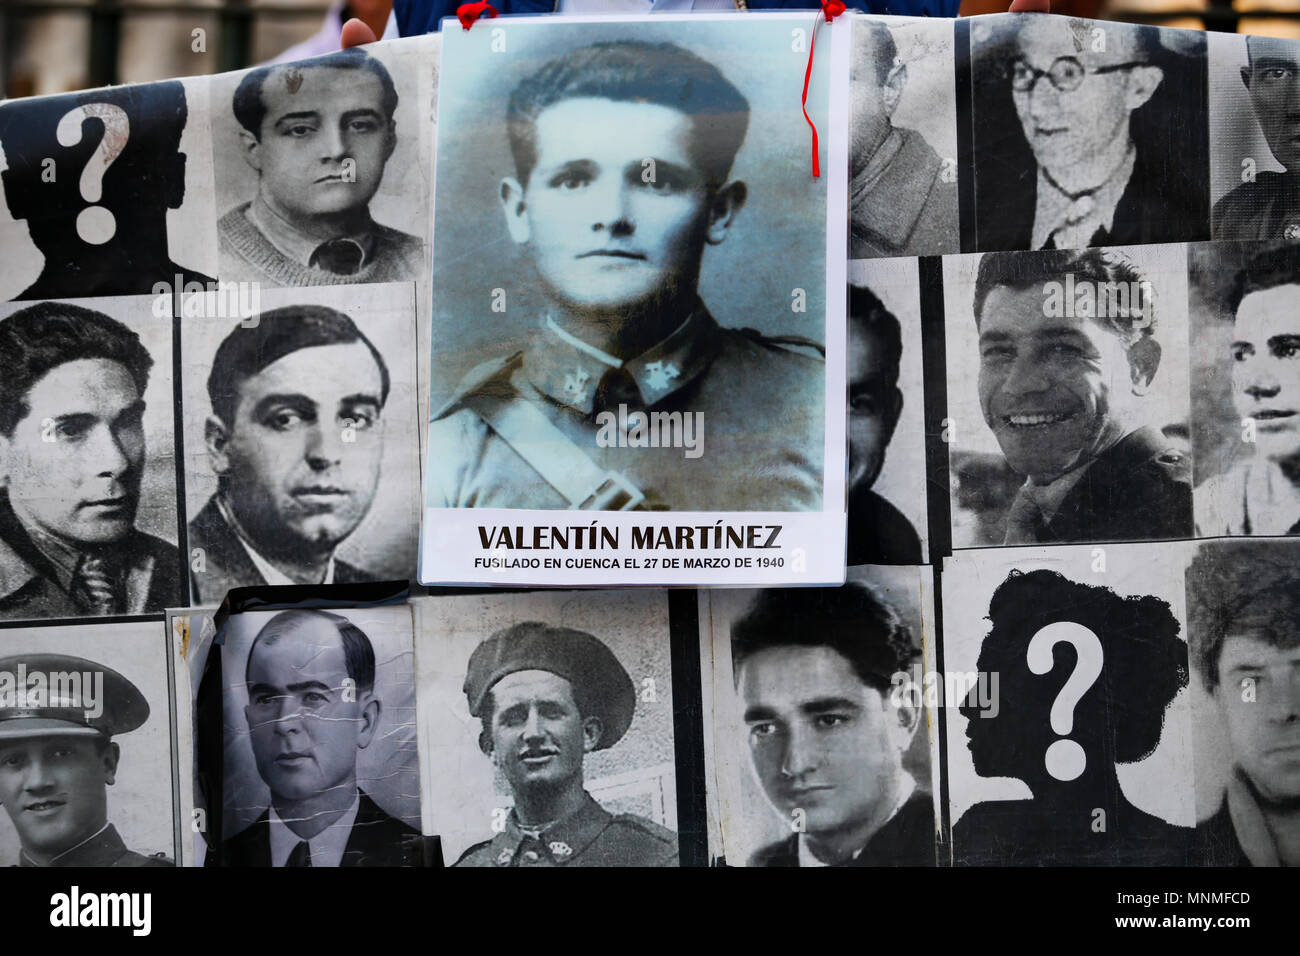 Photographs of disappeared by the Franco regime with thousands of still-unresolved photographs and portraits seen posted in the centre of Madrid. Demonstrators gathered in the center of Madrid in a remembrance rally for those who has lost their lives under the Franco dictatorship. Stock Photo